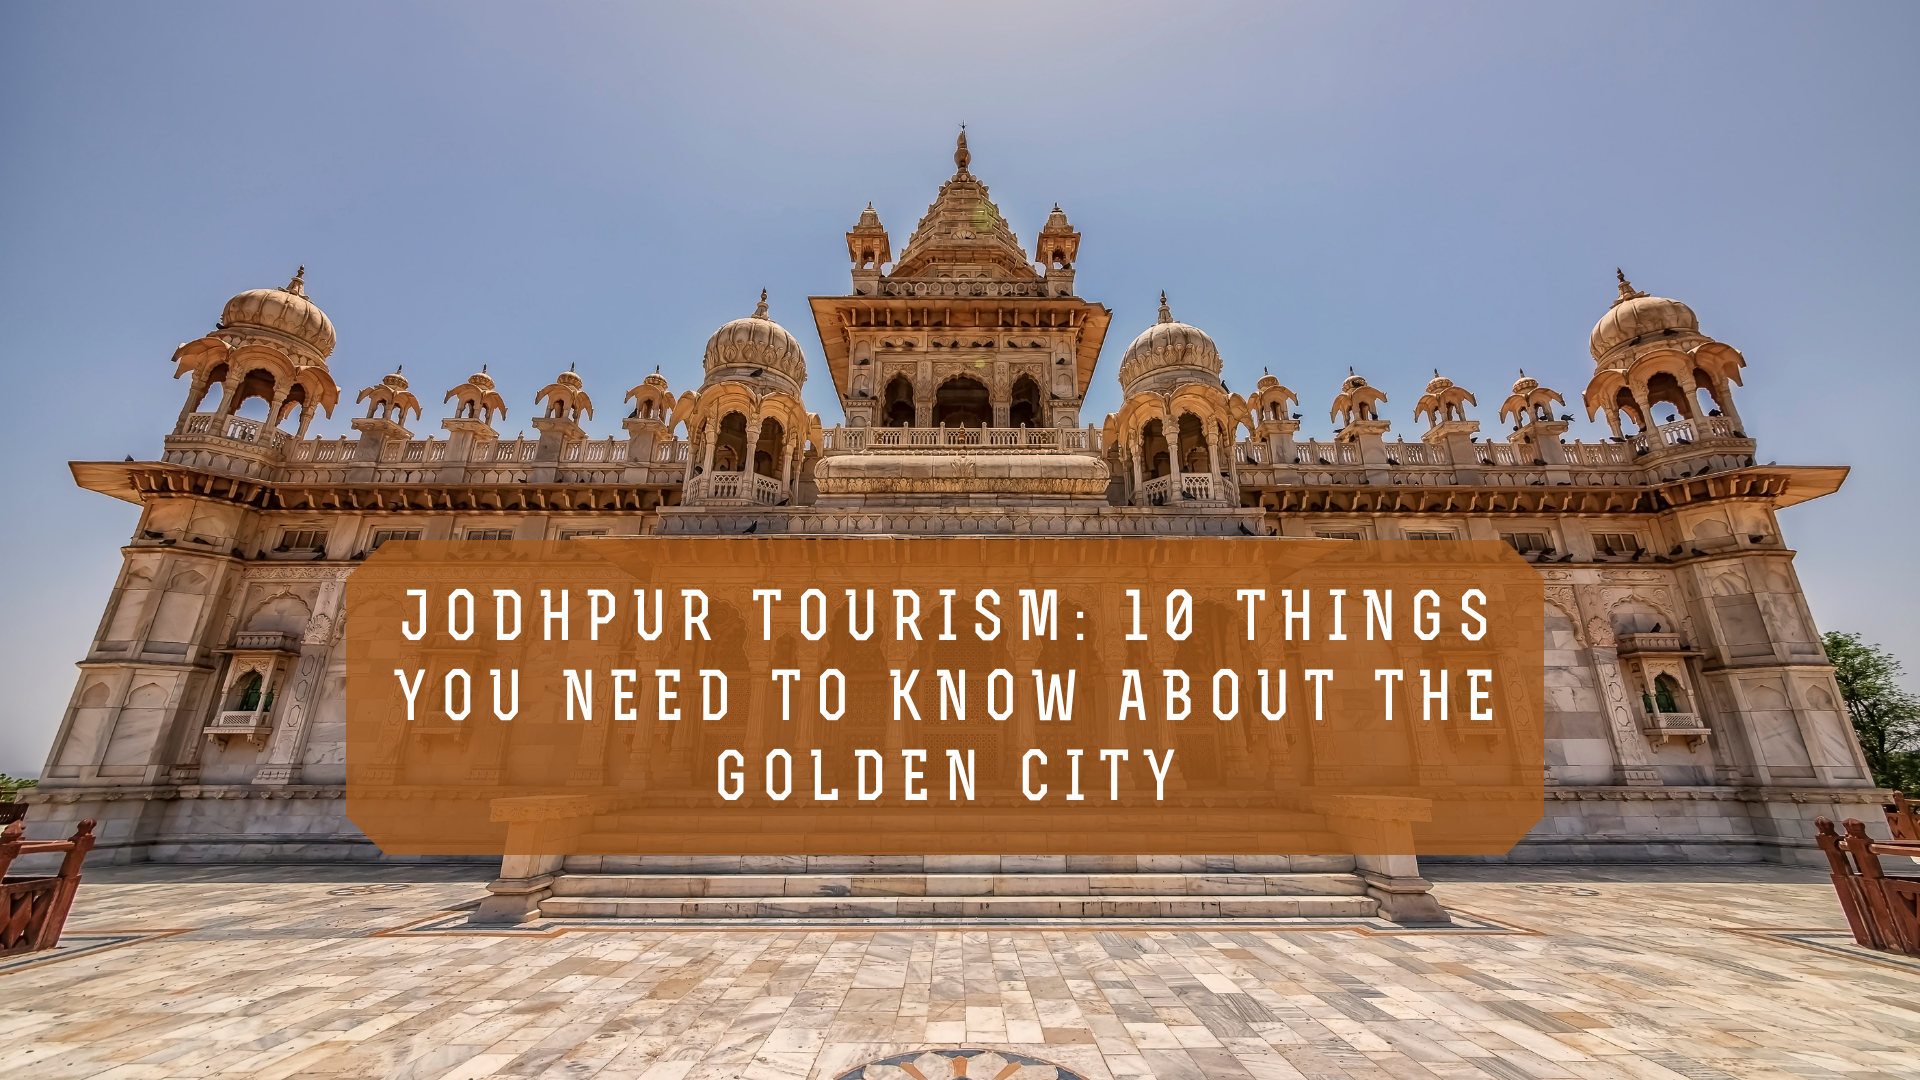 Jodhpur Tourism 10 Things You Need To Know About The Golden City